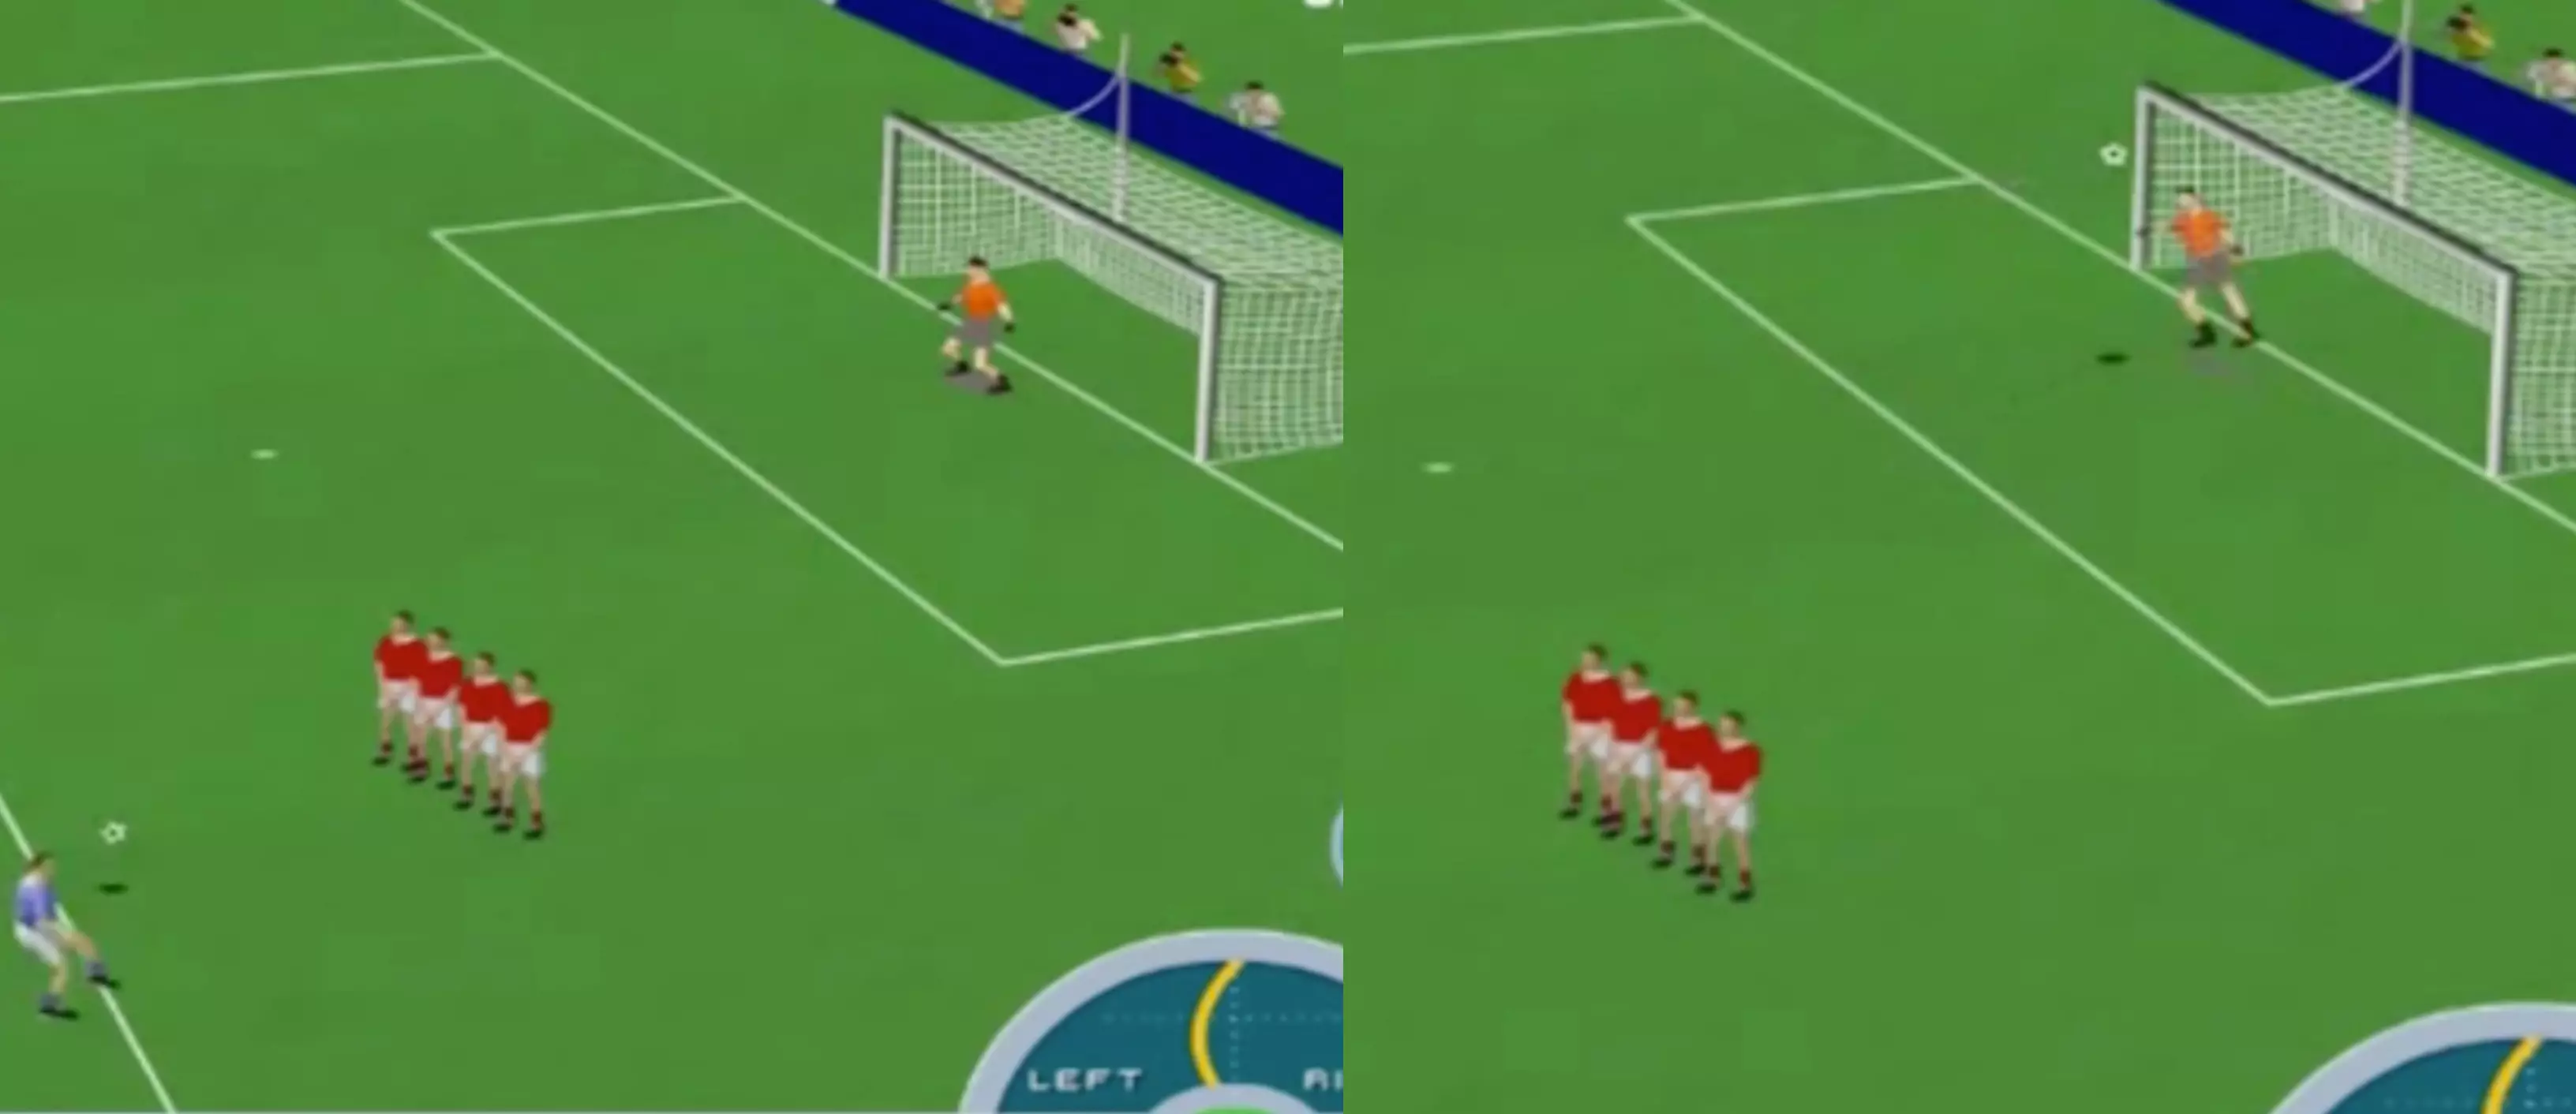 A Lot Of Hours Were Spent On Roberto Baggio's Magical Kicks Game